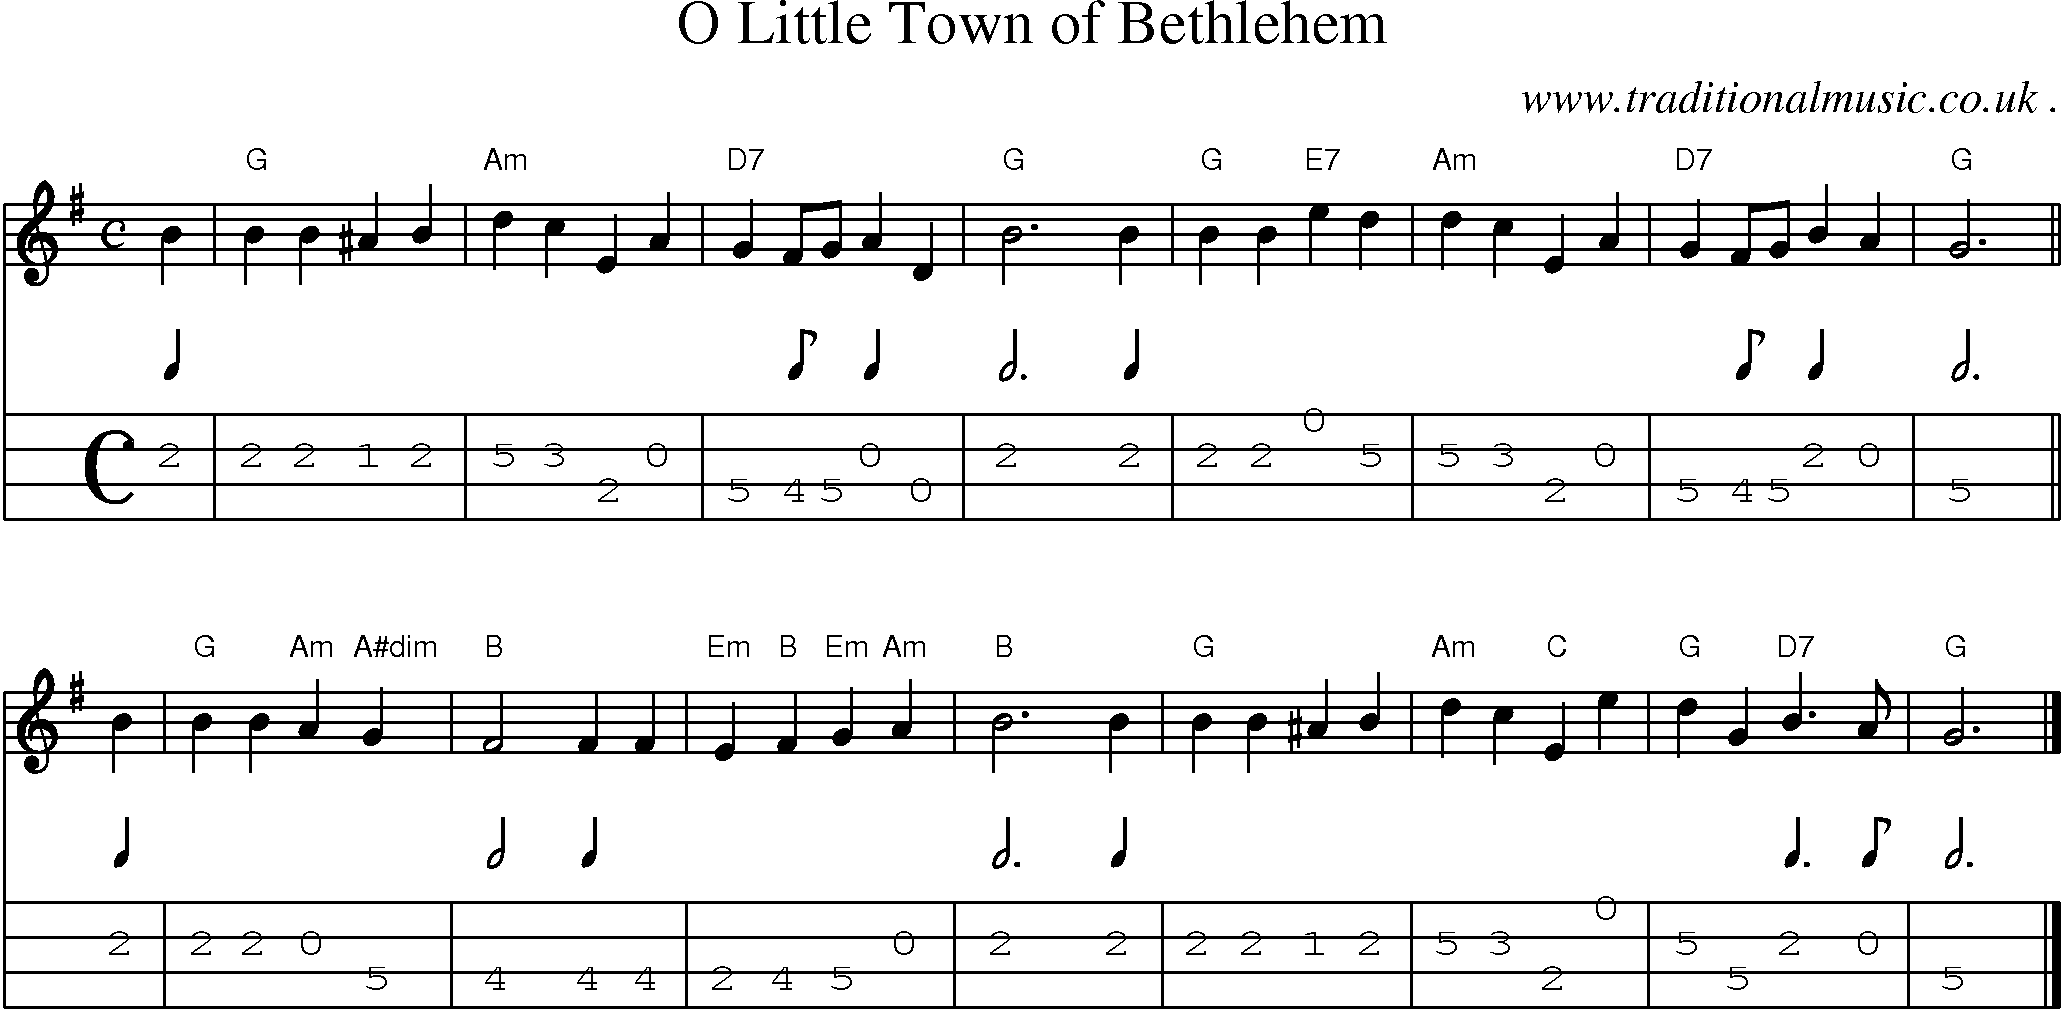 Sheet-music  score, Chords and Mandolin Tabs for O Little Town Of Bethlehem